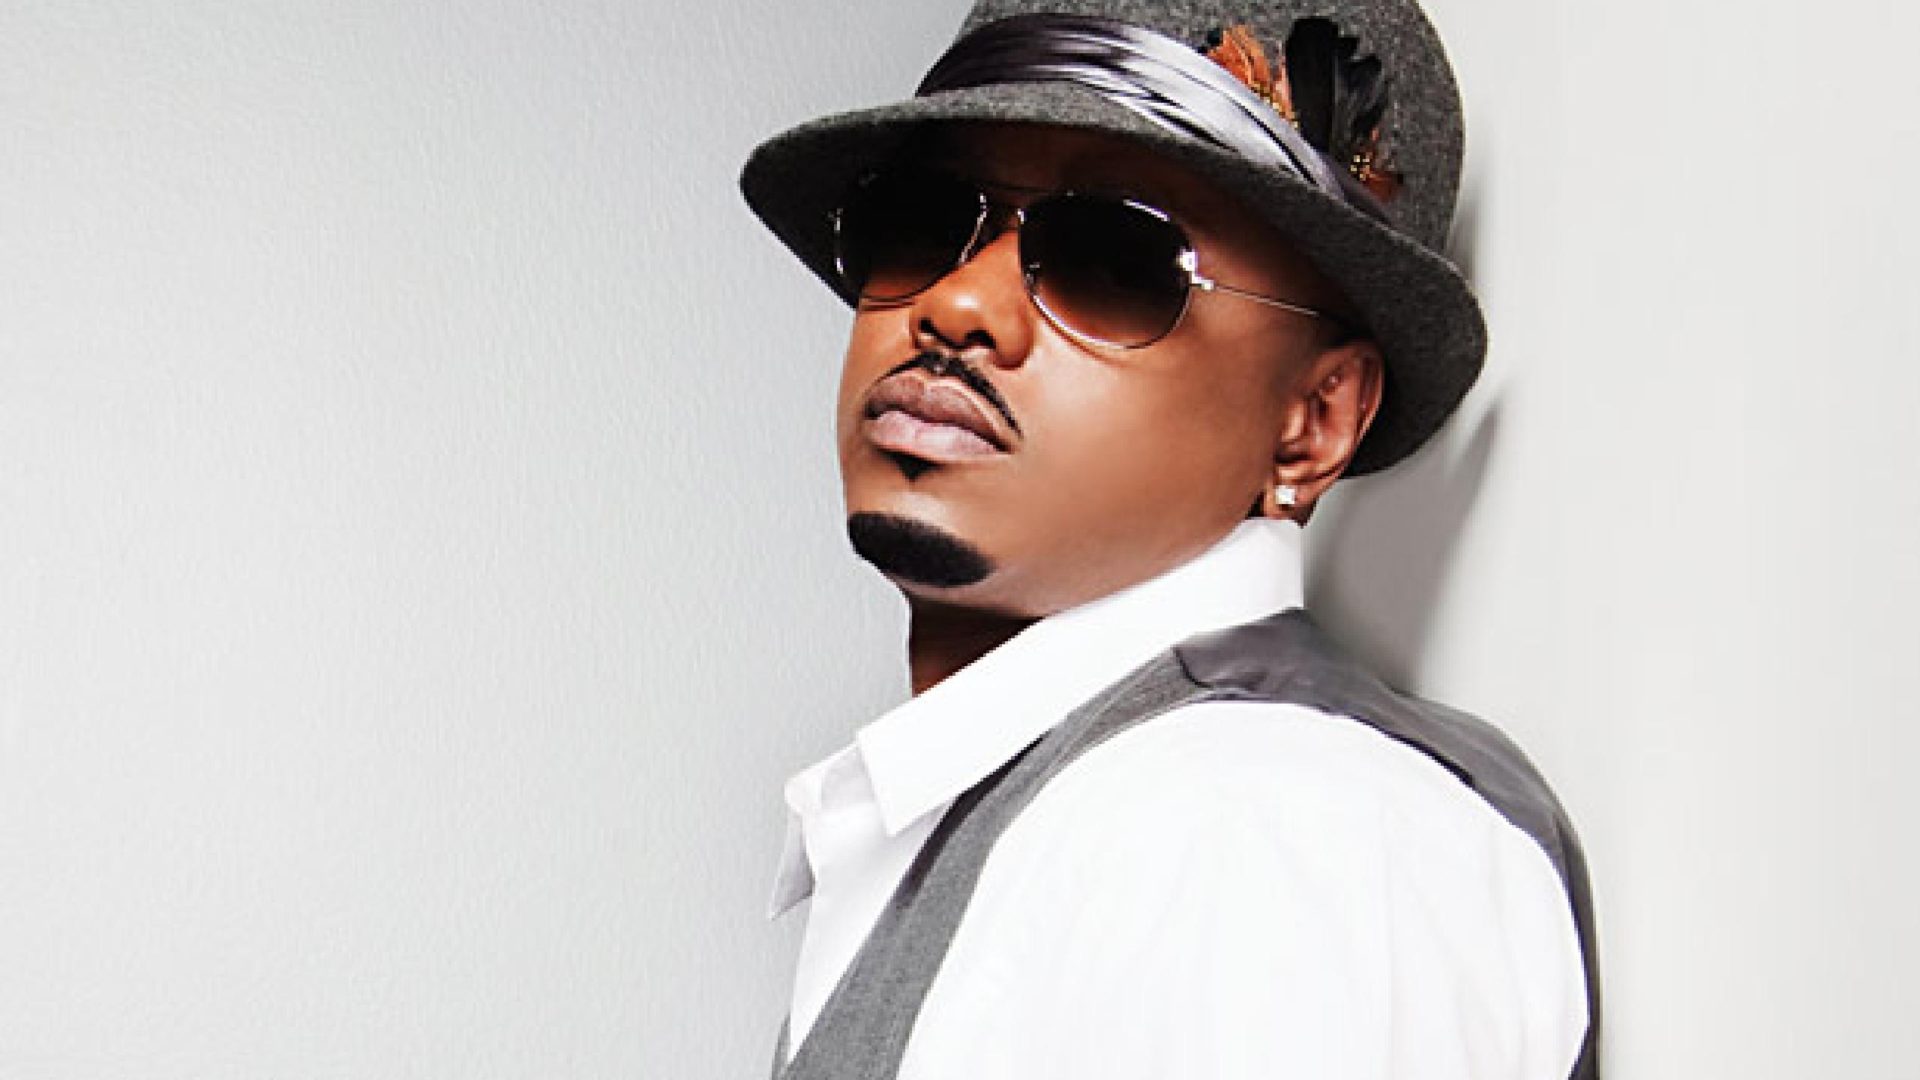 Donell Jones is Bringing Back Real R&B with New Album, ‘100 Free